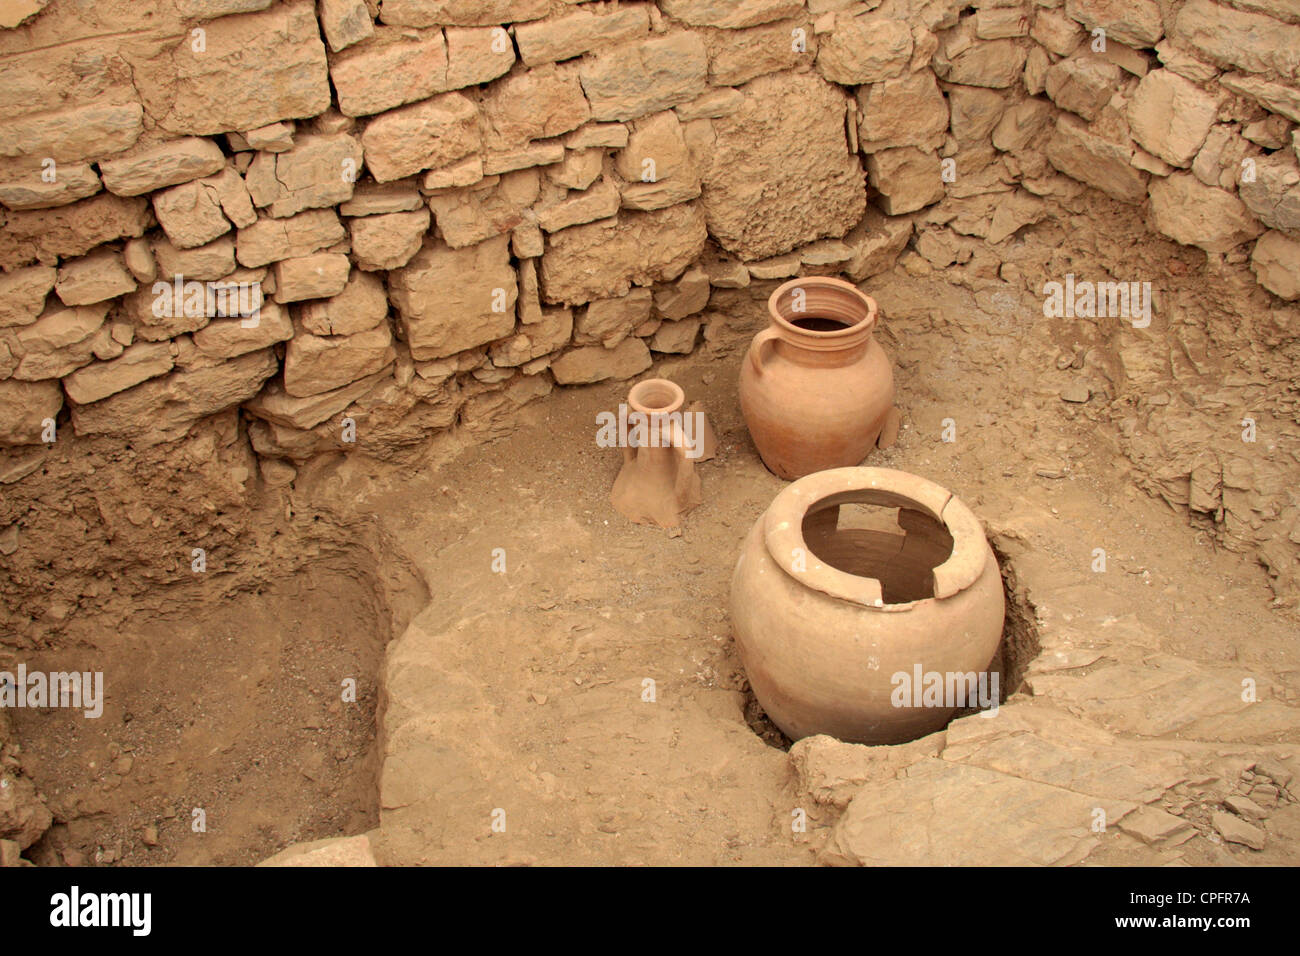 Ephesus: Terrace House 2 - Dwelling Unit 7 - storage pots were buried in the floor Stock Photo